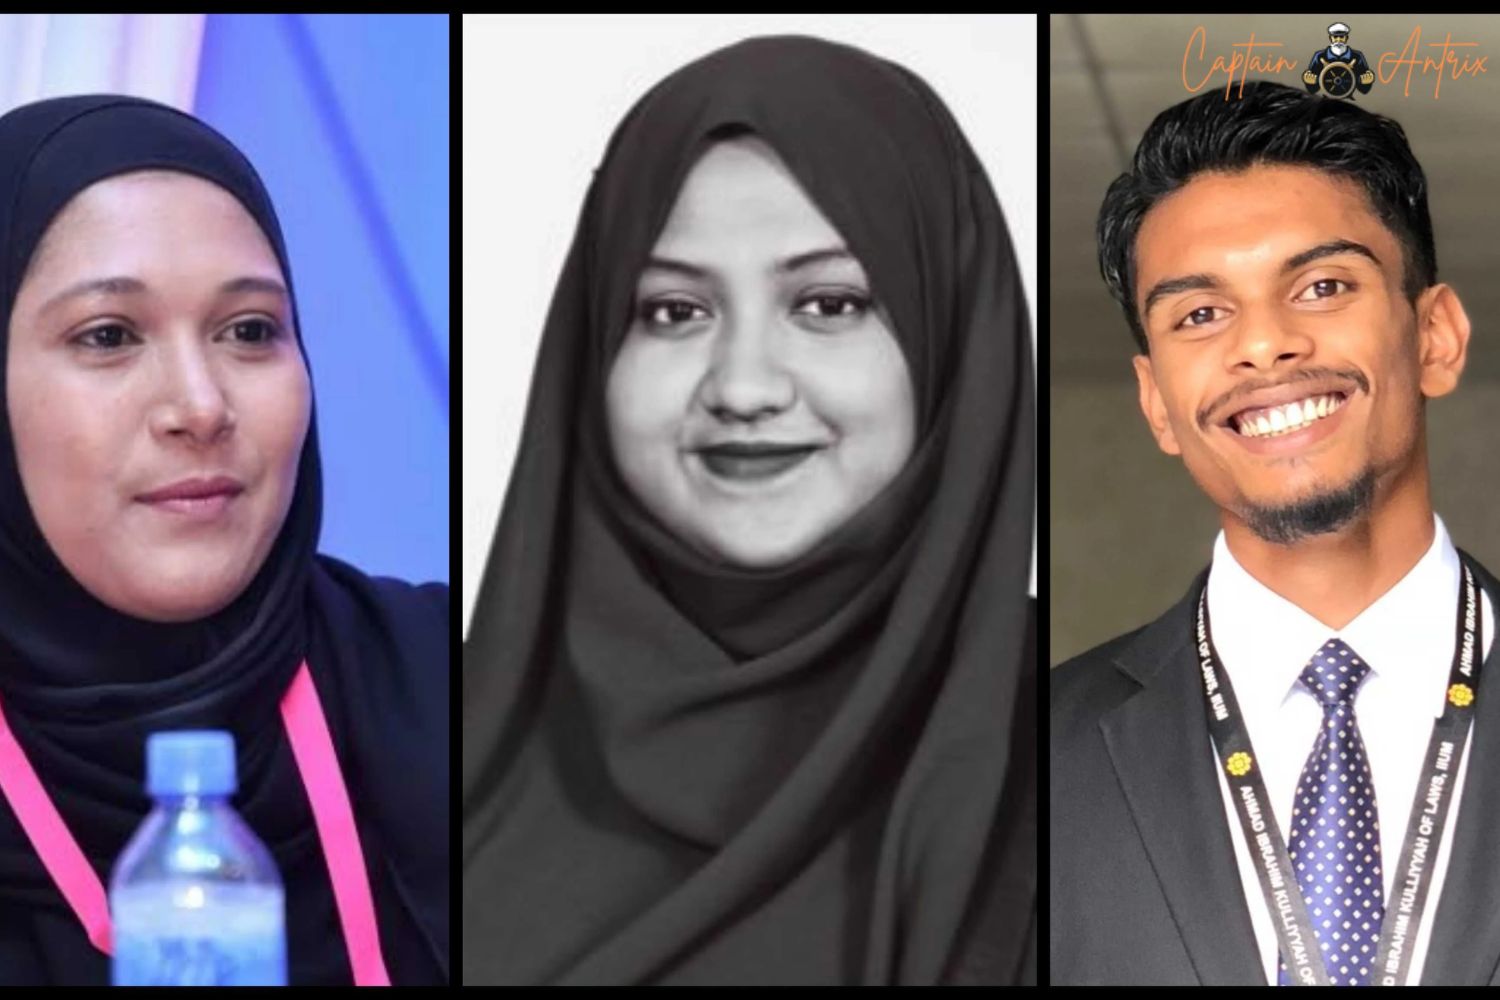 Maldives Ministers SUSPENDED over Anti-India Remarks! 'Boycott Maldives' Movement EXPLODES on Social Media! Impact on Tourism and Celebrities Join the Call!